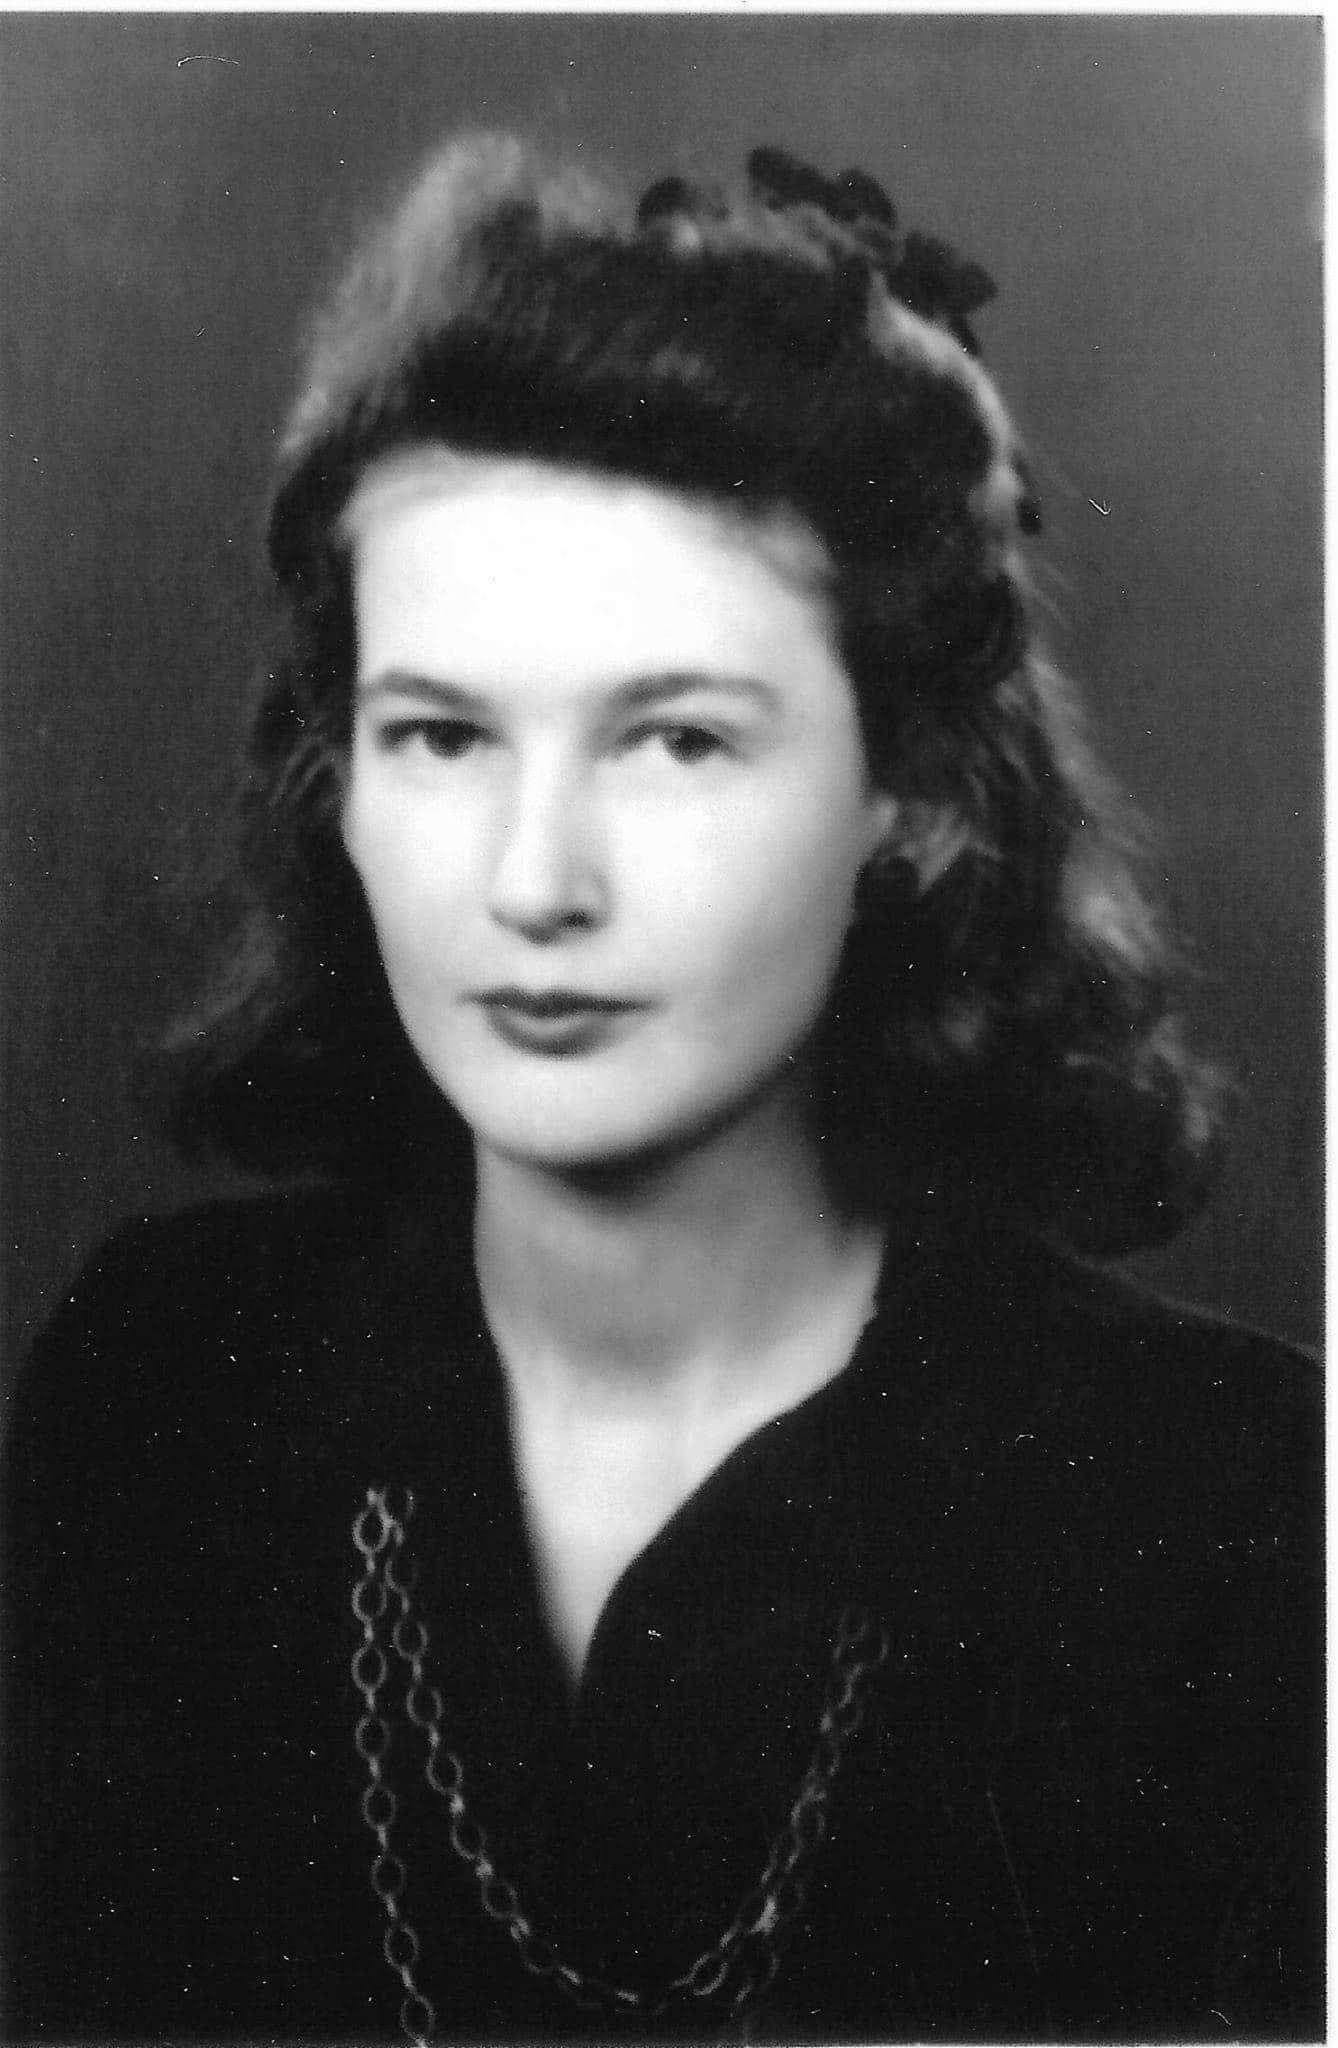 Jean Gregory Haskell – 1951-1962